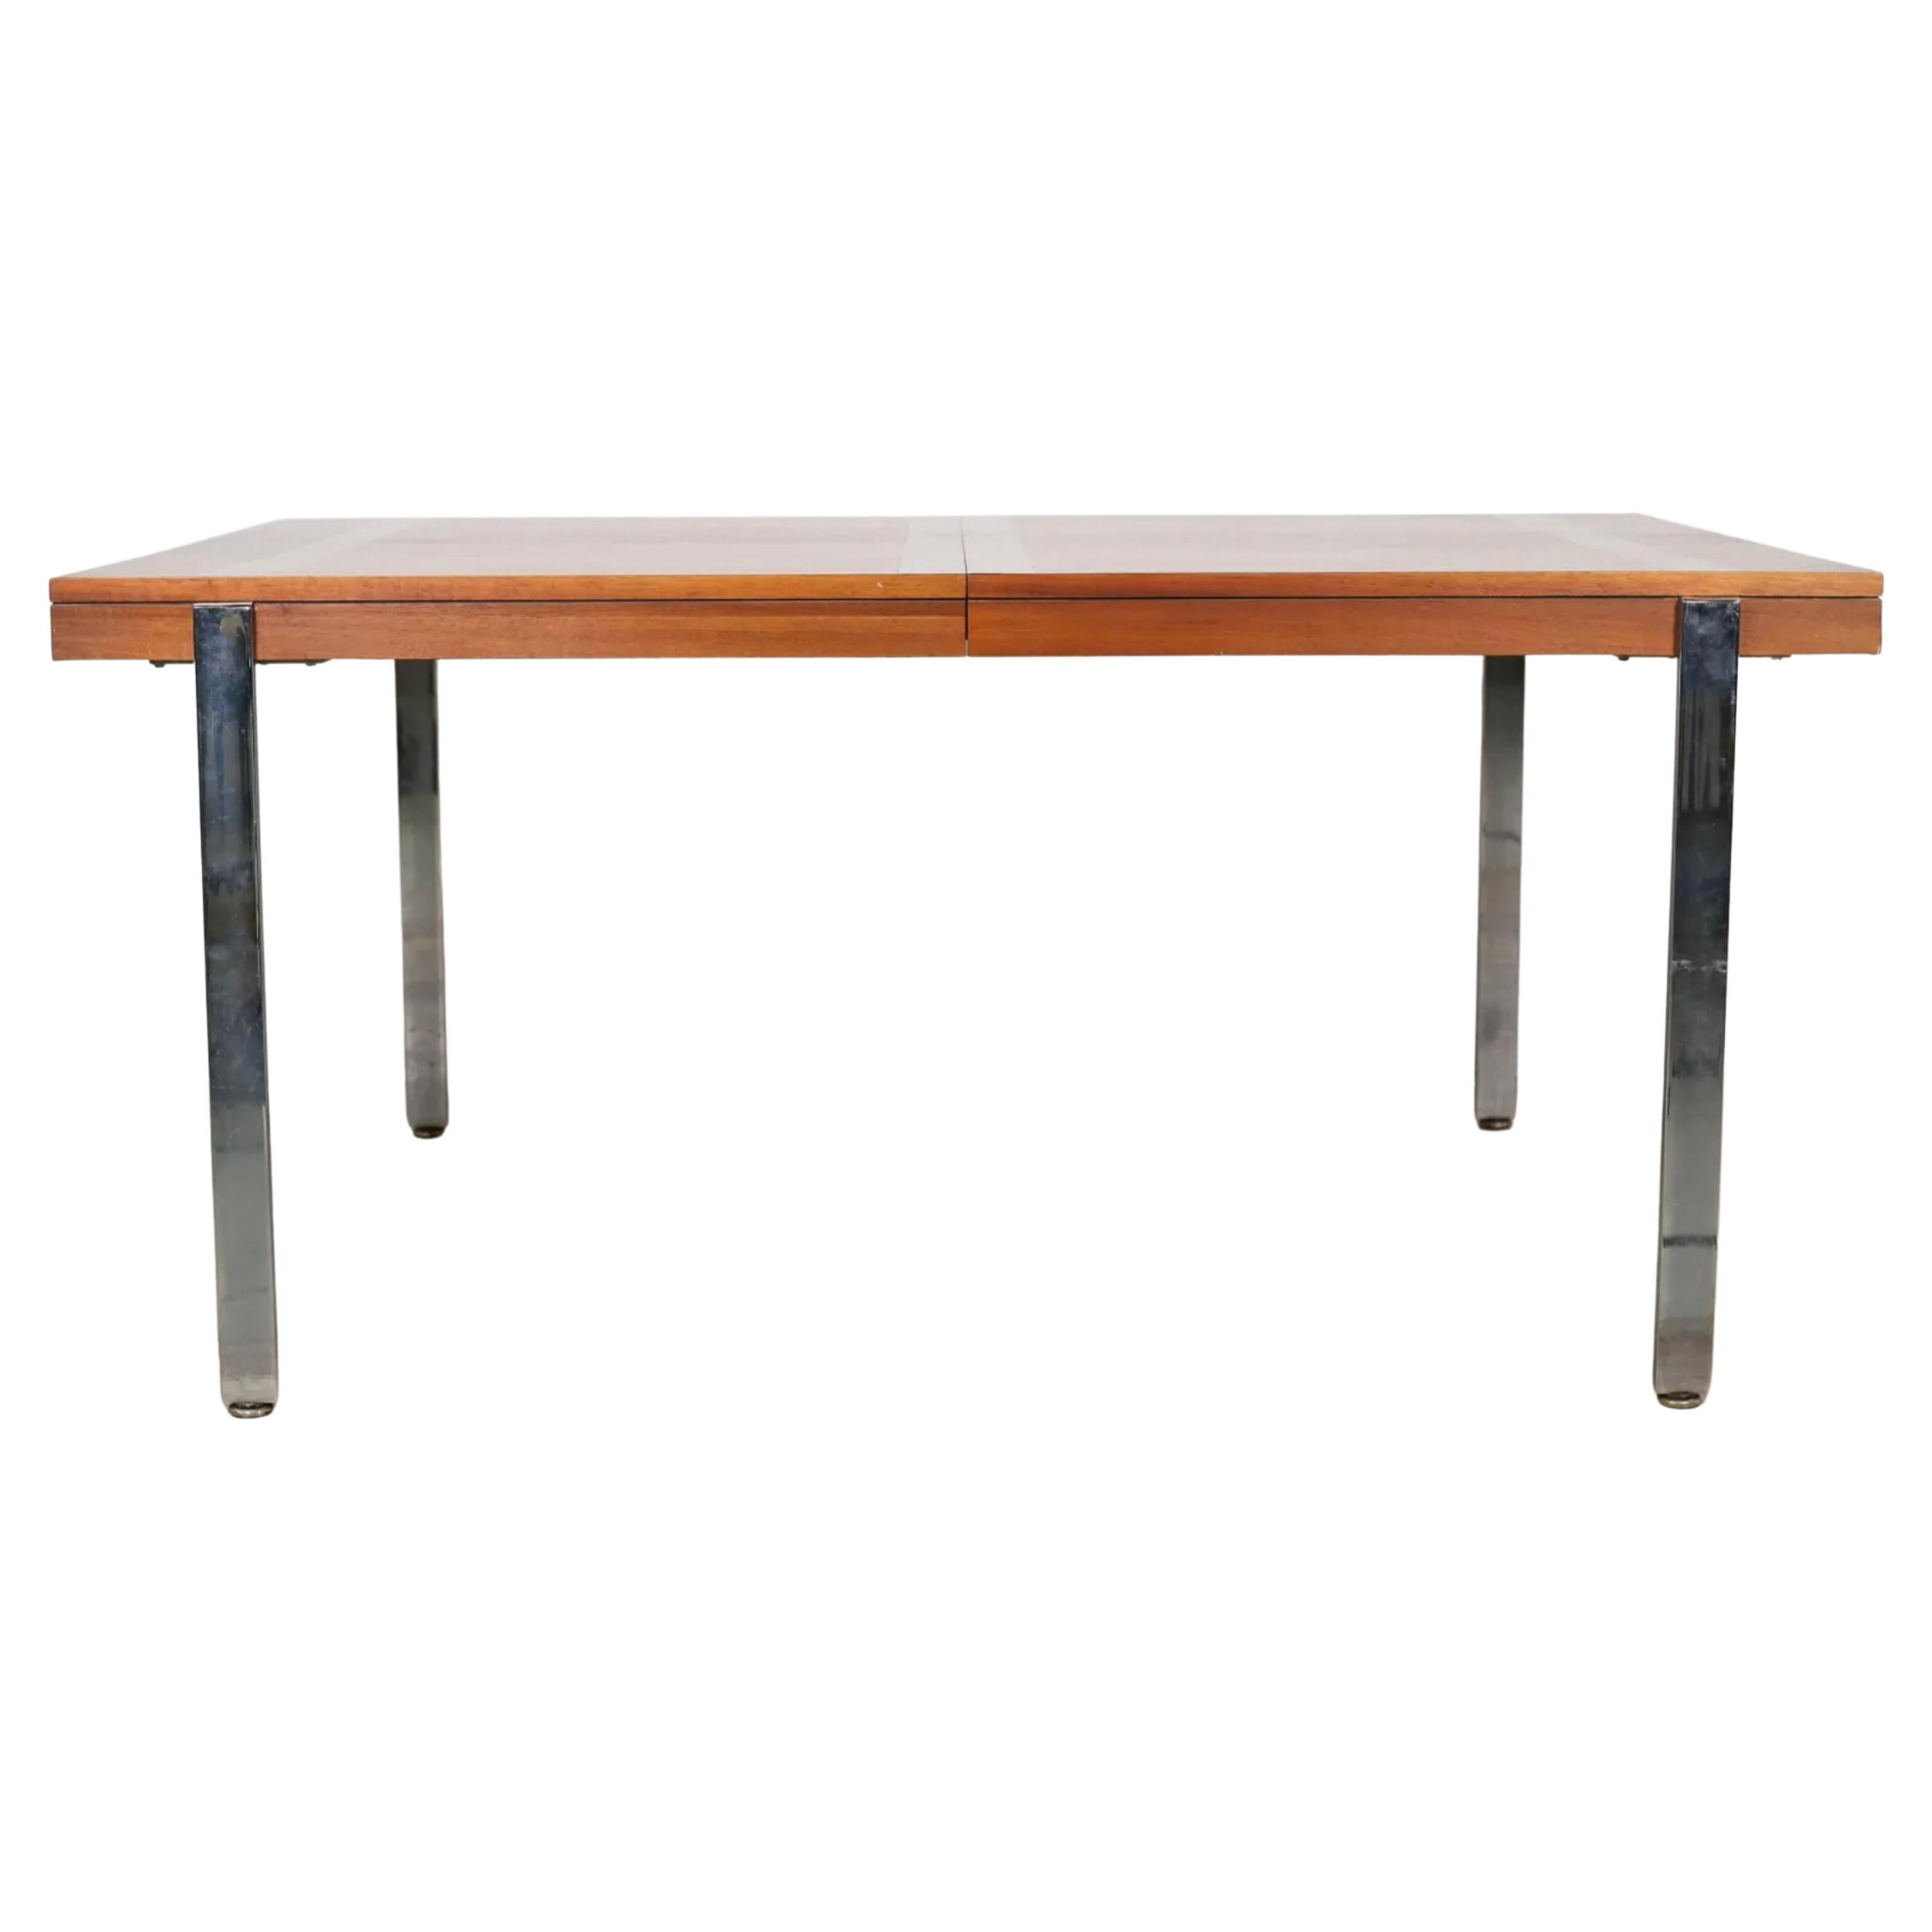 Mid Century Modern dining table by Lane Furniture Co. Altavista, Virginia. Made of walnut with hardwood bands with flat bar chrome legs. Lane label and on underside of table. Table comes with 2 Leaves. Each leaf is 18